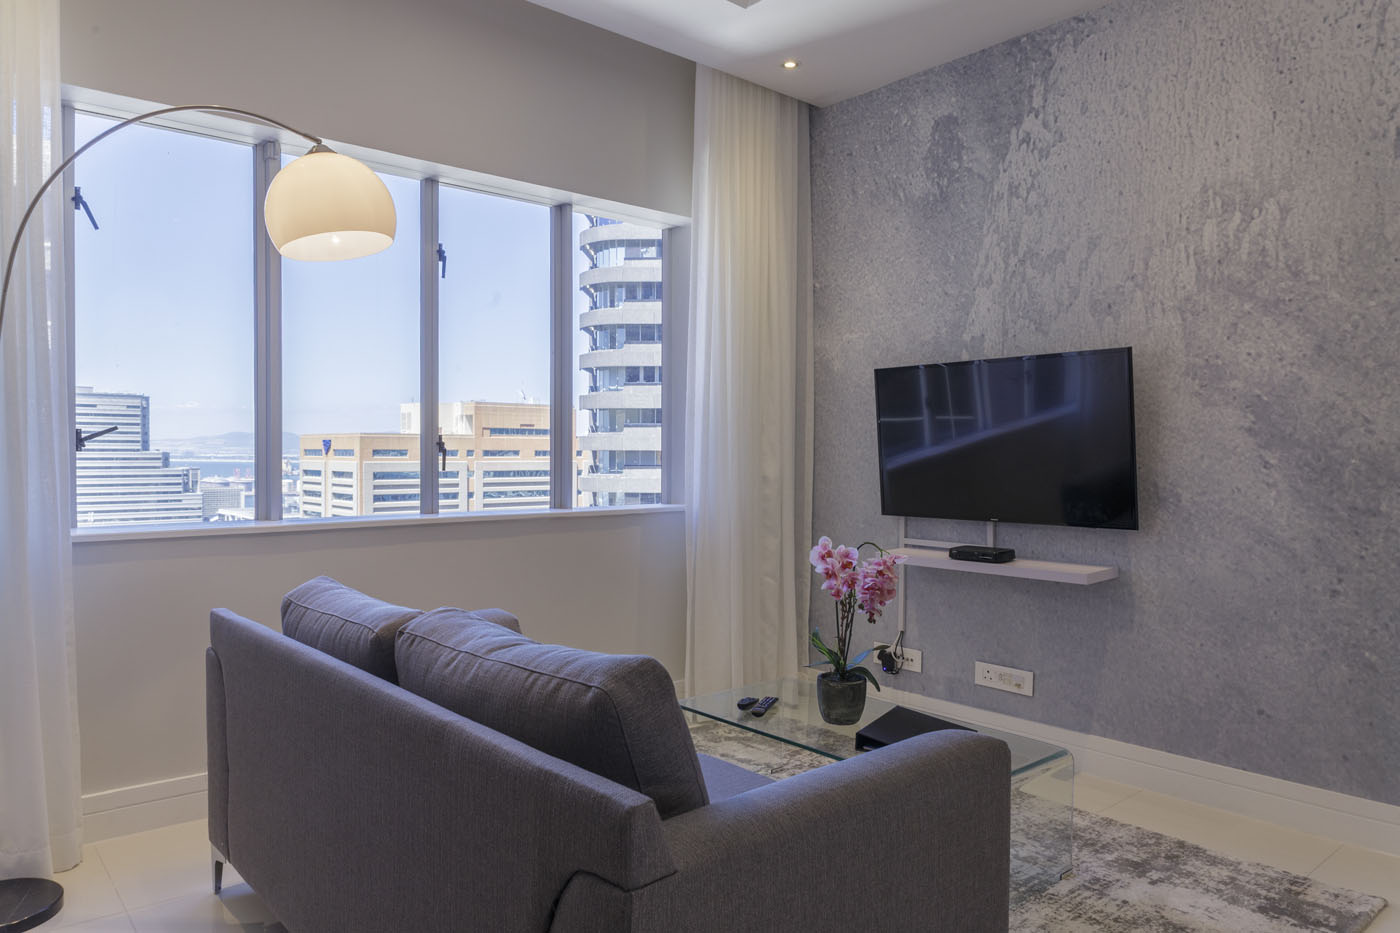 Photo 21 of Triangle Suites 2012 accommodation in City Centre, Cape Town with 2 bedrooms and 2 bathrooms